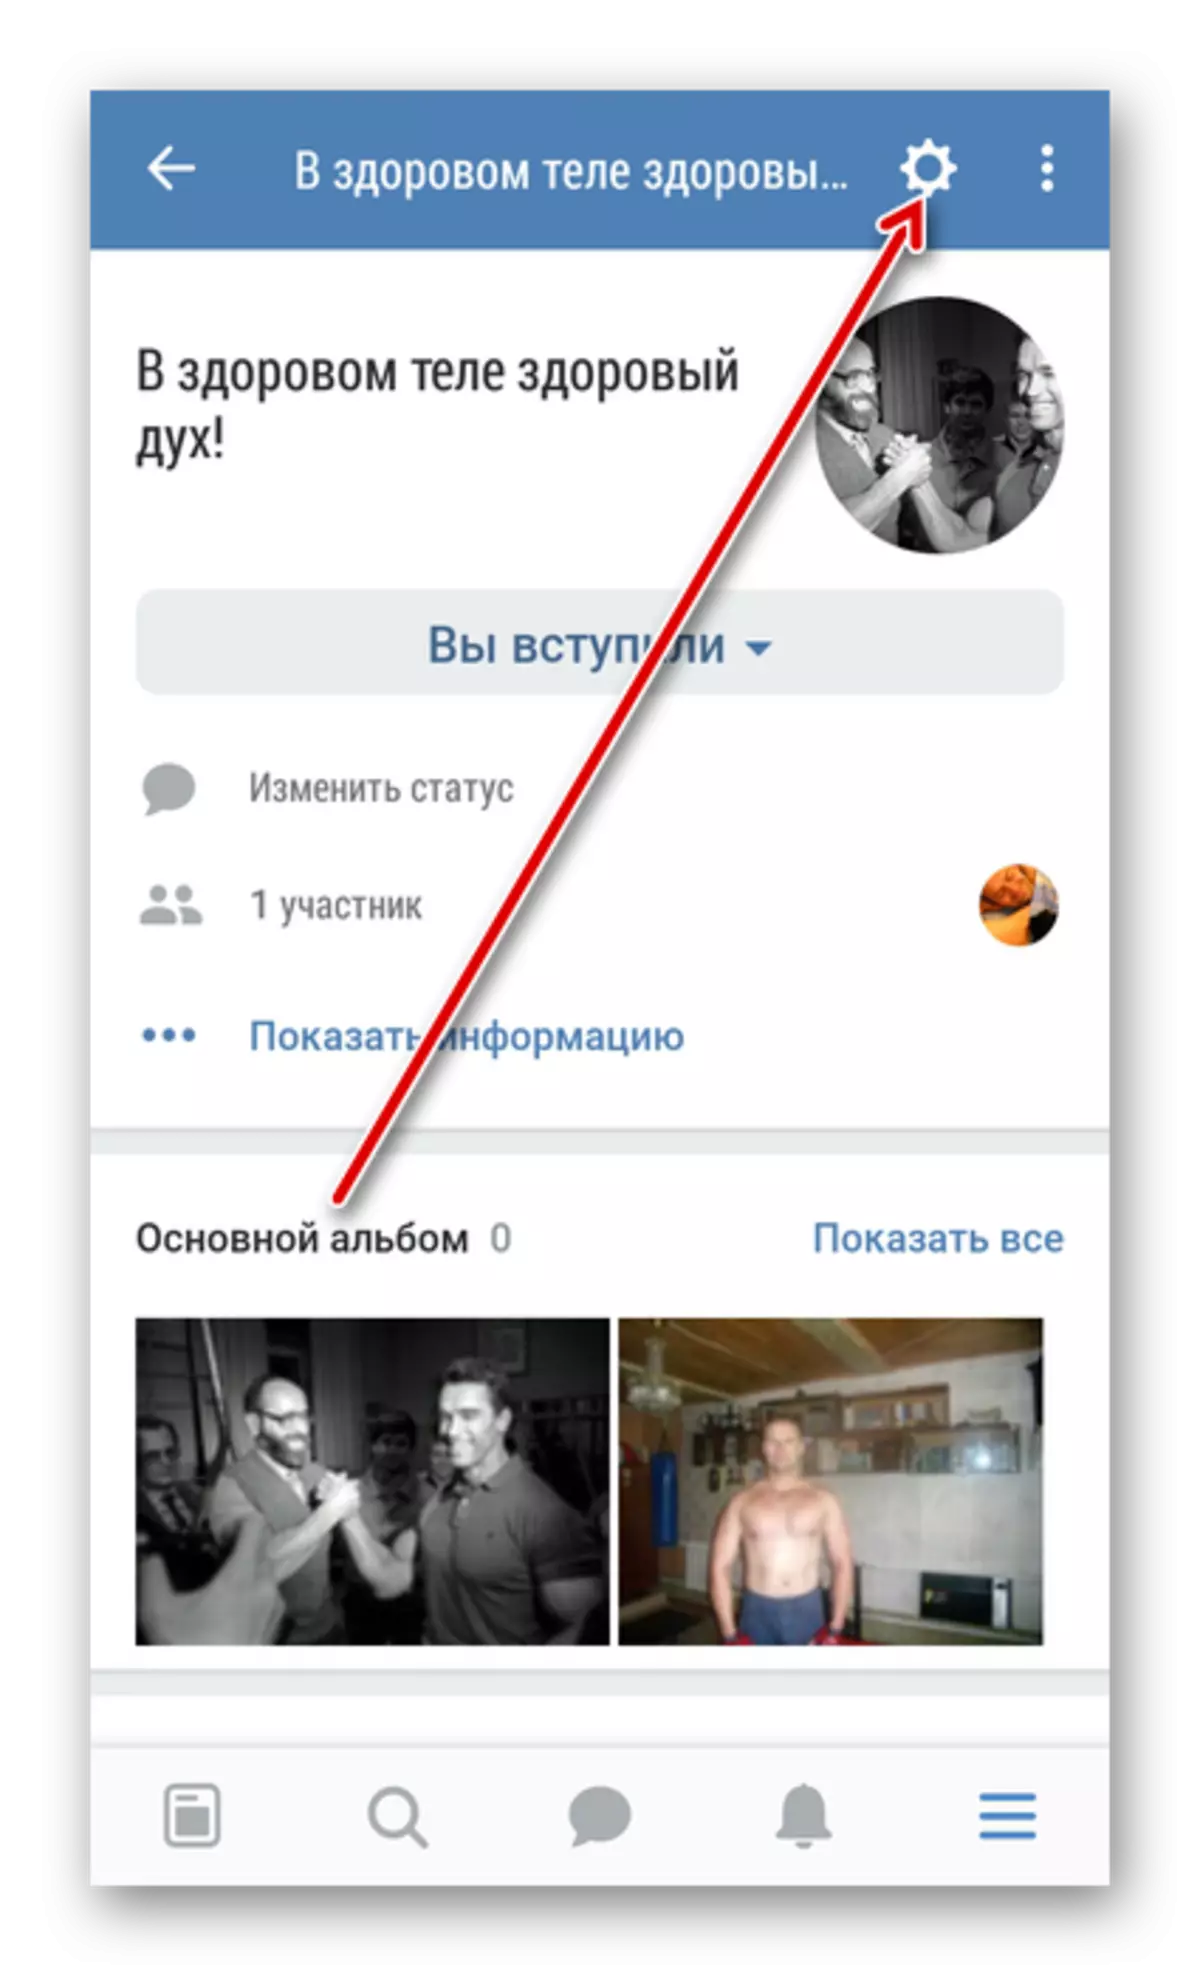 Log in to the settings of your group in VKontakte